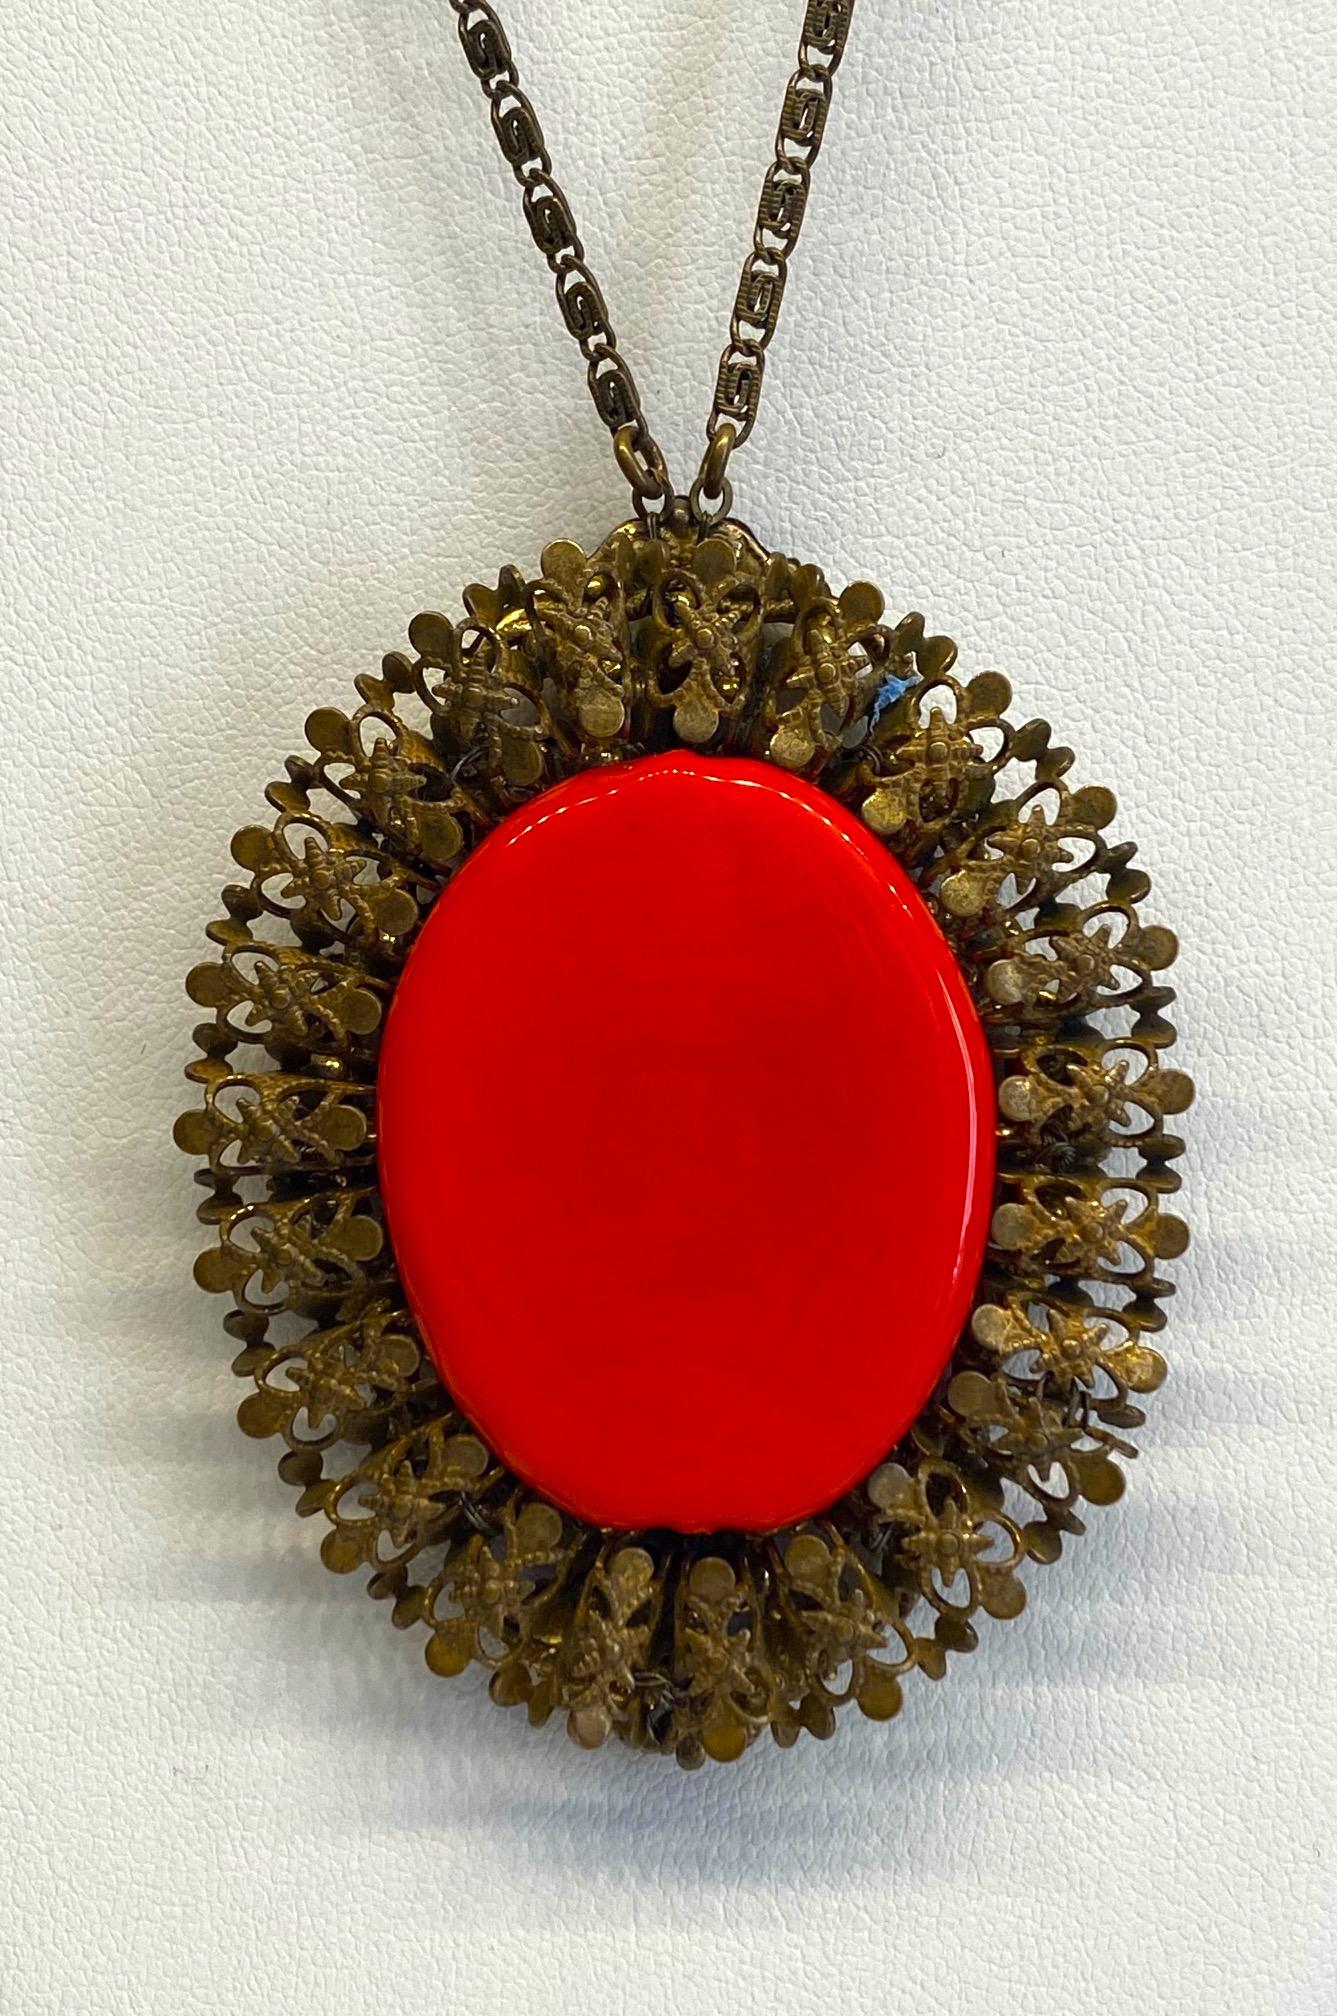 A vintage Miriam Haskell 1960s pendant necklace with opaque orange red glass center. The finish is Haskell's well known antique Russian gold plate. The pendant is 2.13 inches wide, 2.75 inches high and .38 of an inch deep. The center is a hand